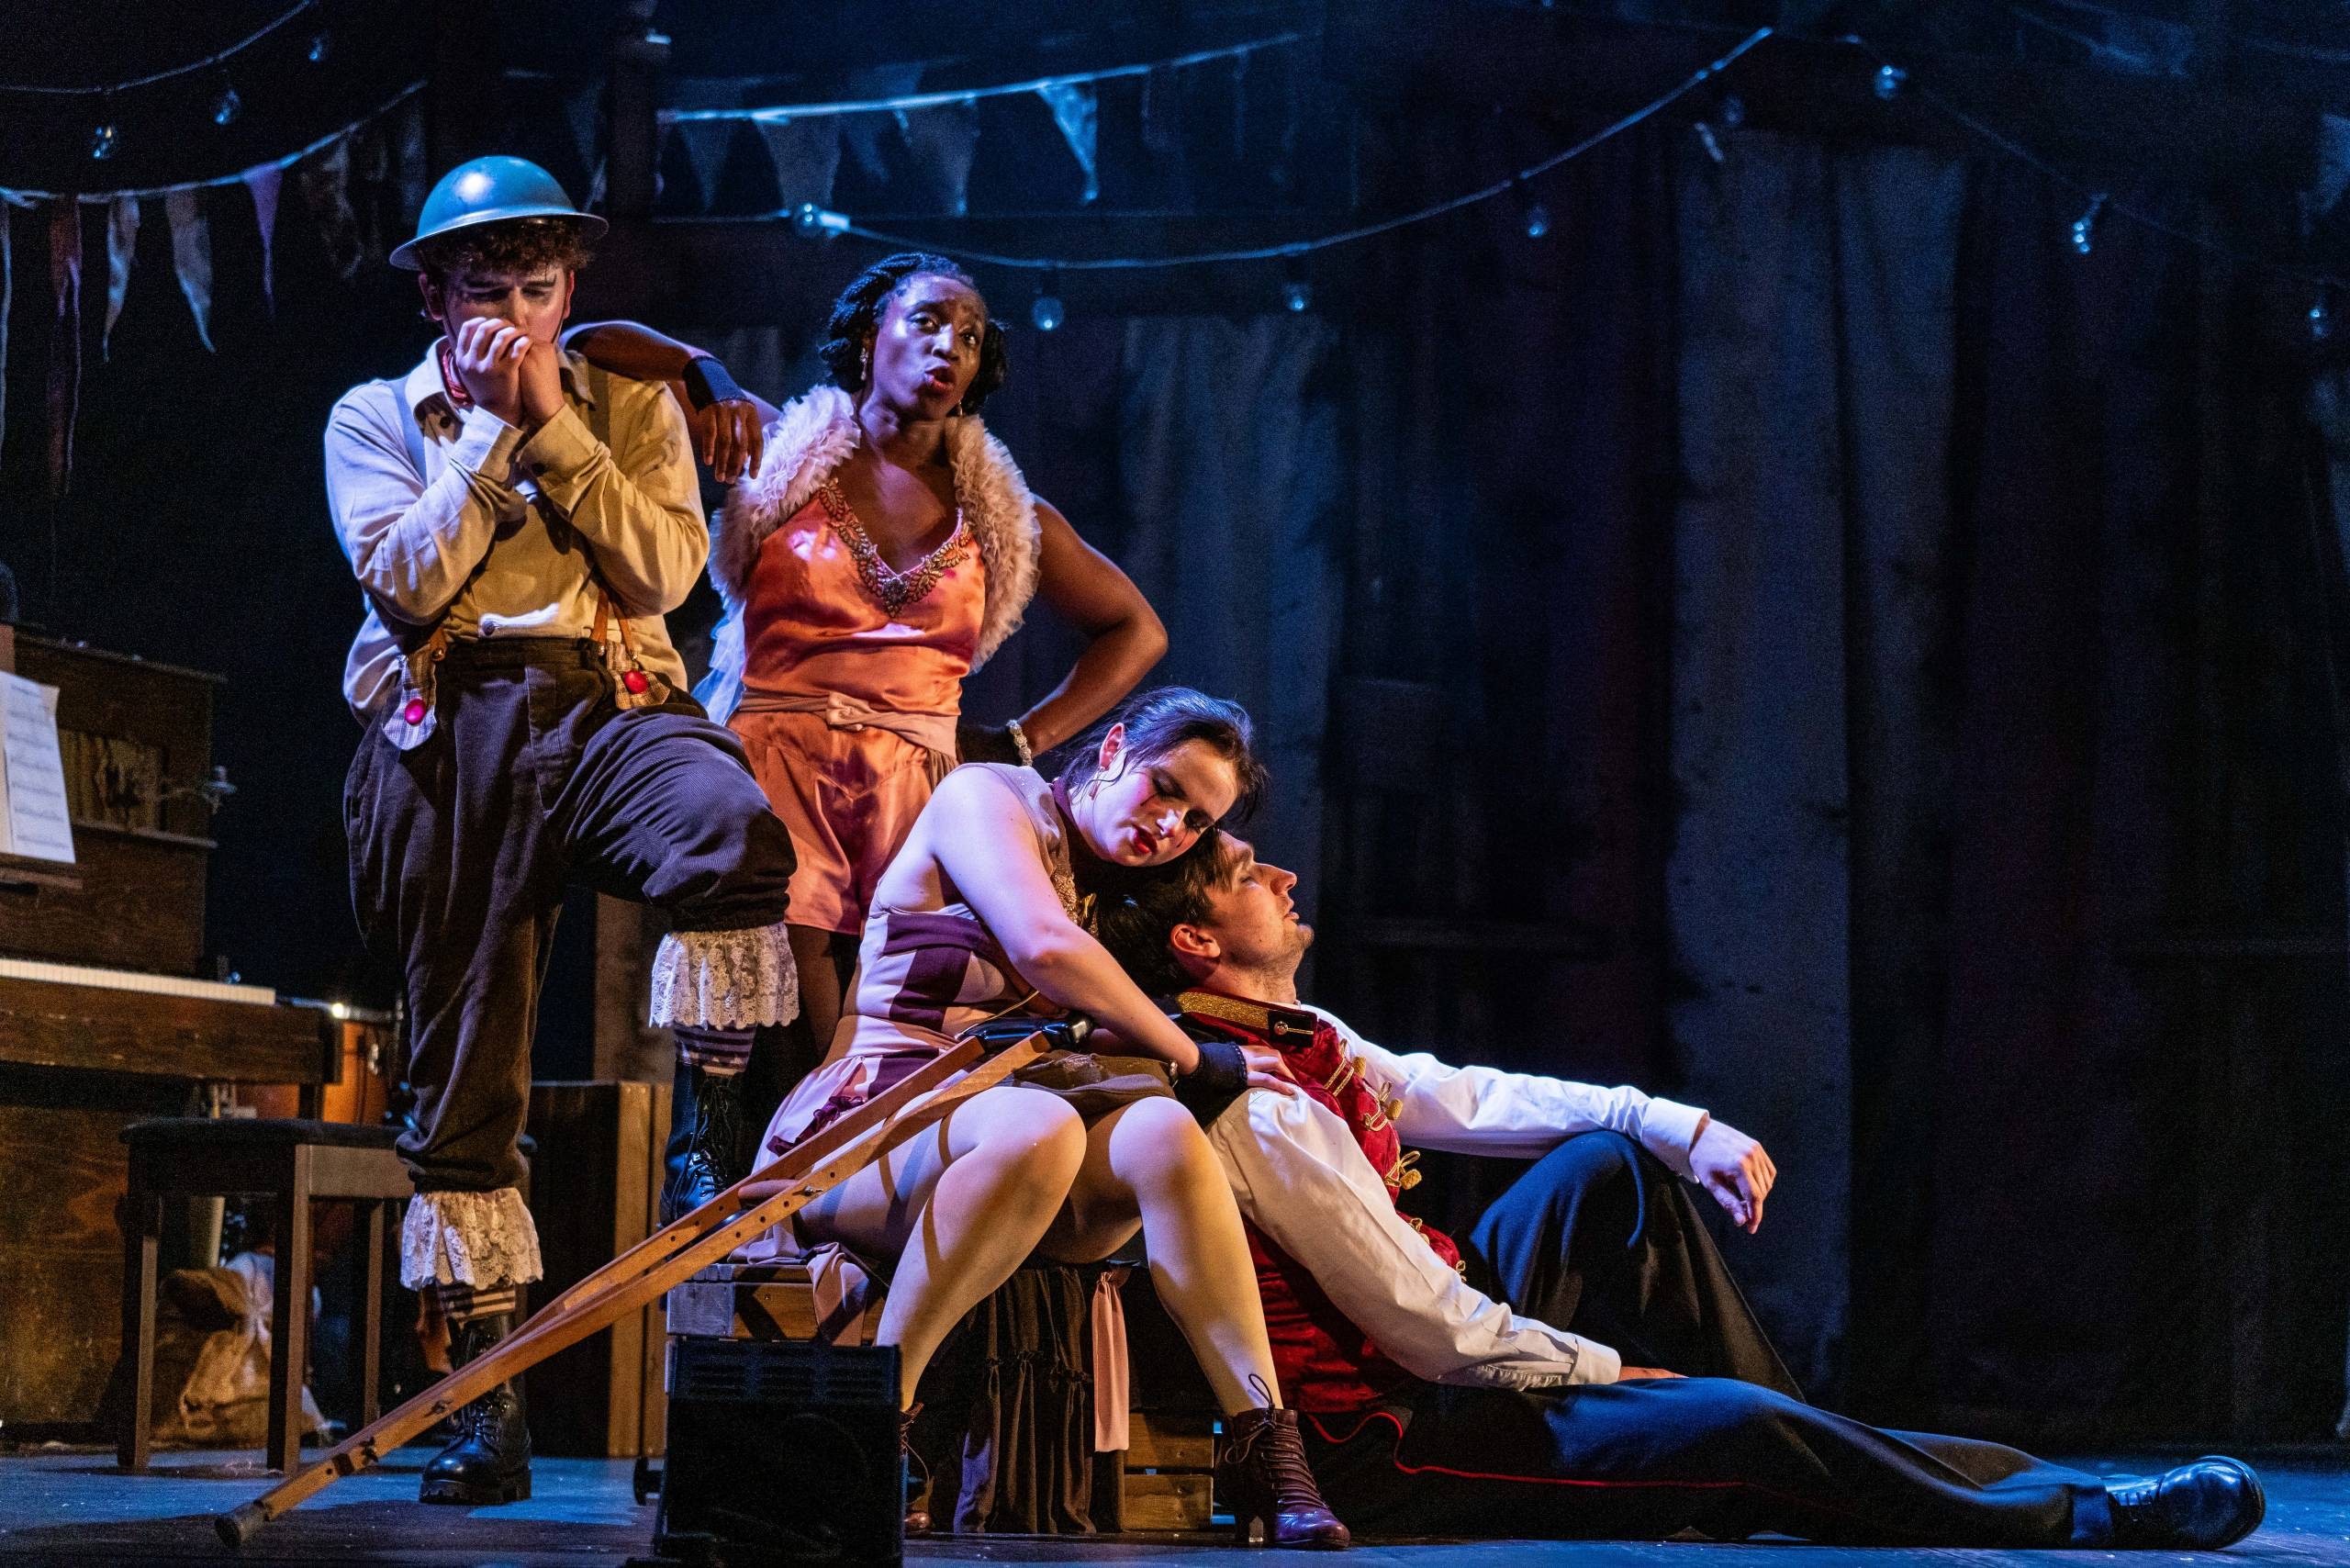 Four characters on stage, two male and two female. One male stands and plays the harmonica while one female has her arm on his shoulder. The other male and female sit on the floor together.